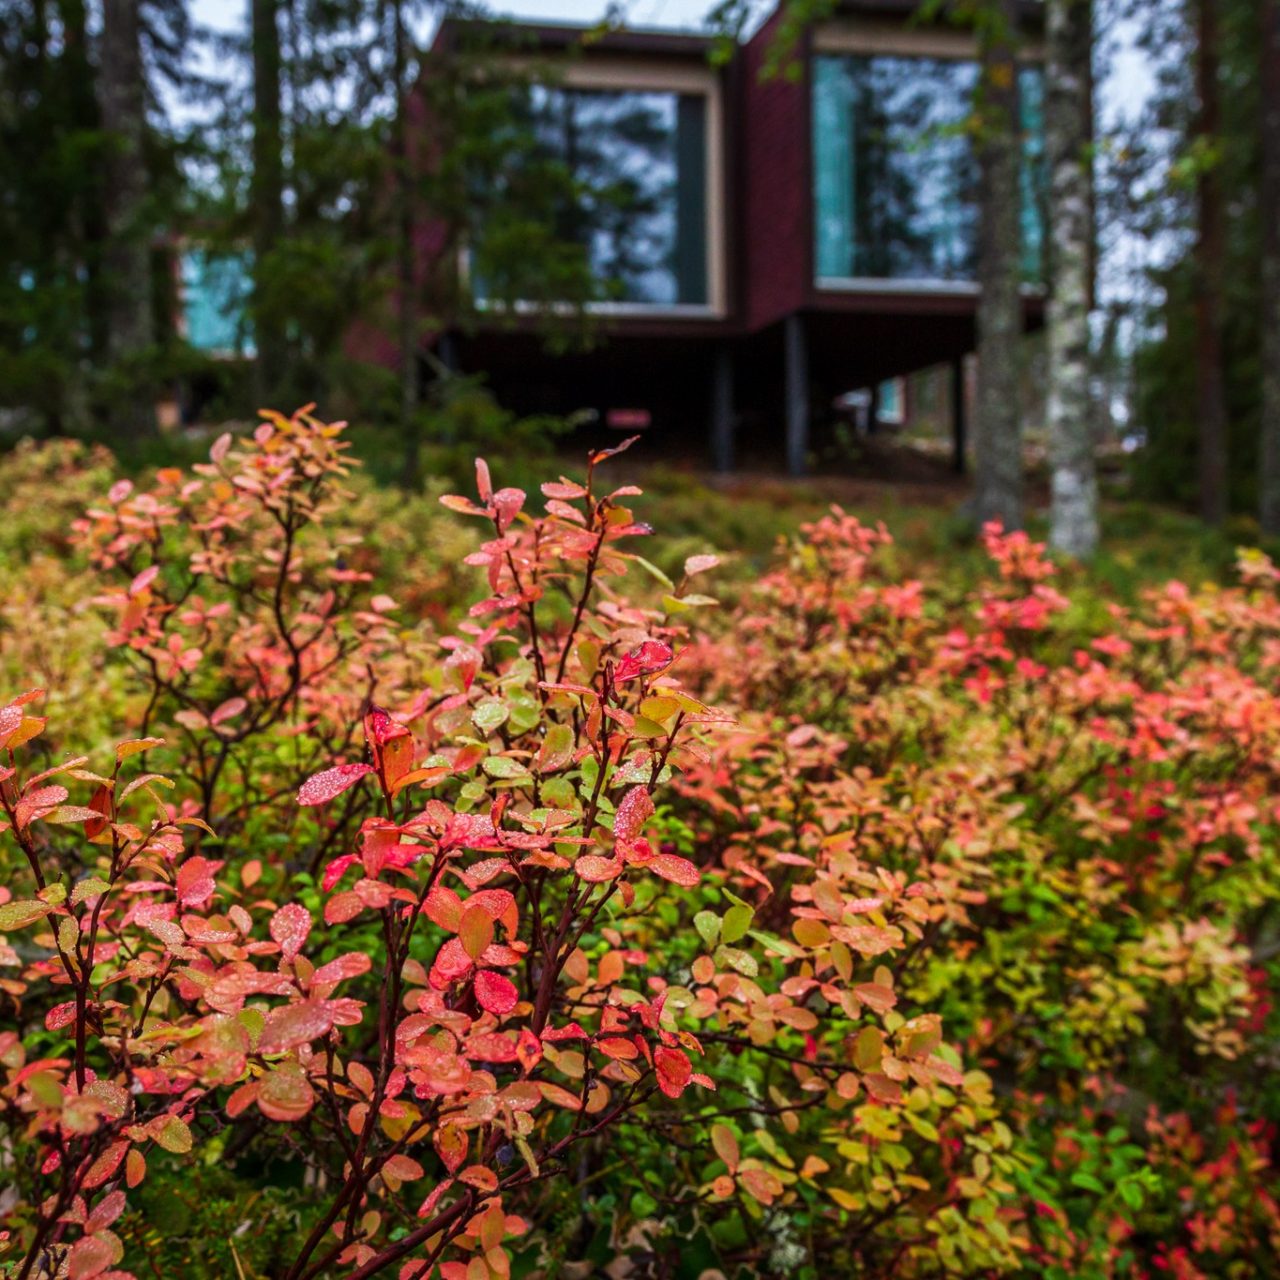 Autumn foliage covering the nature in Arctic TreeHouse Hotel.